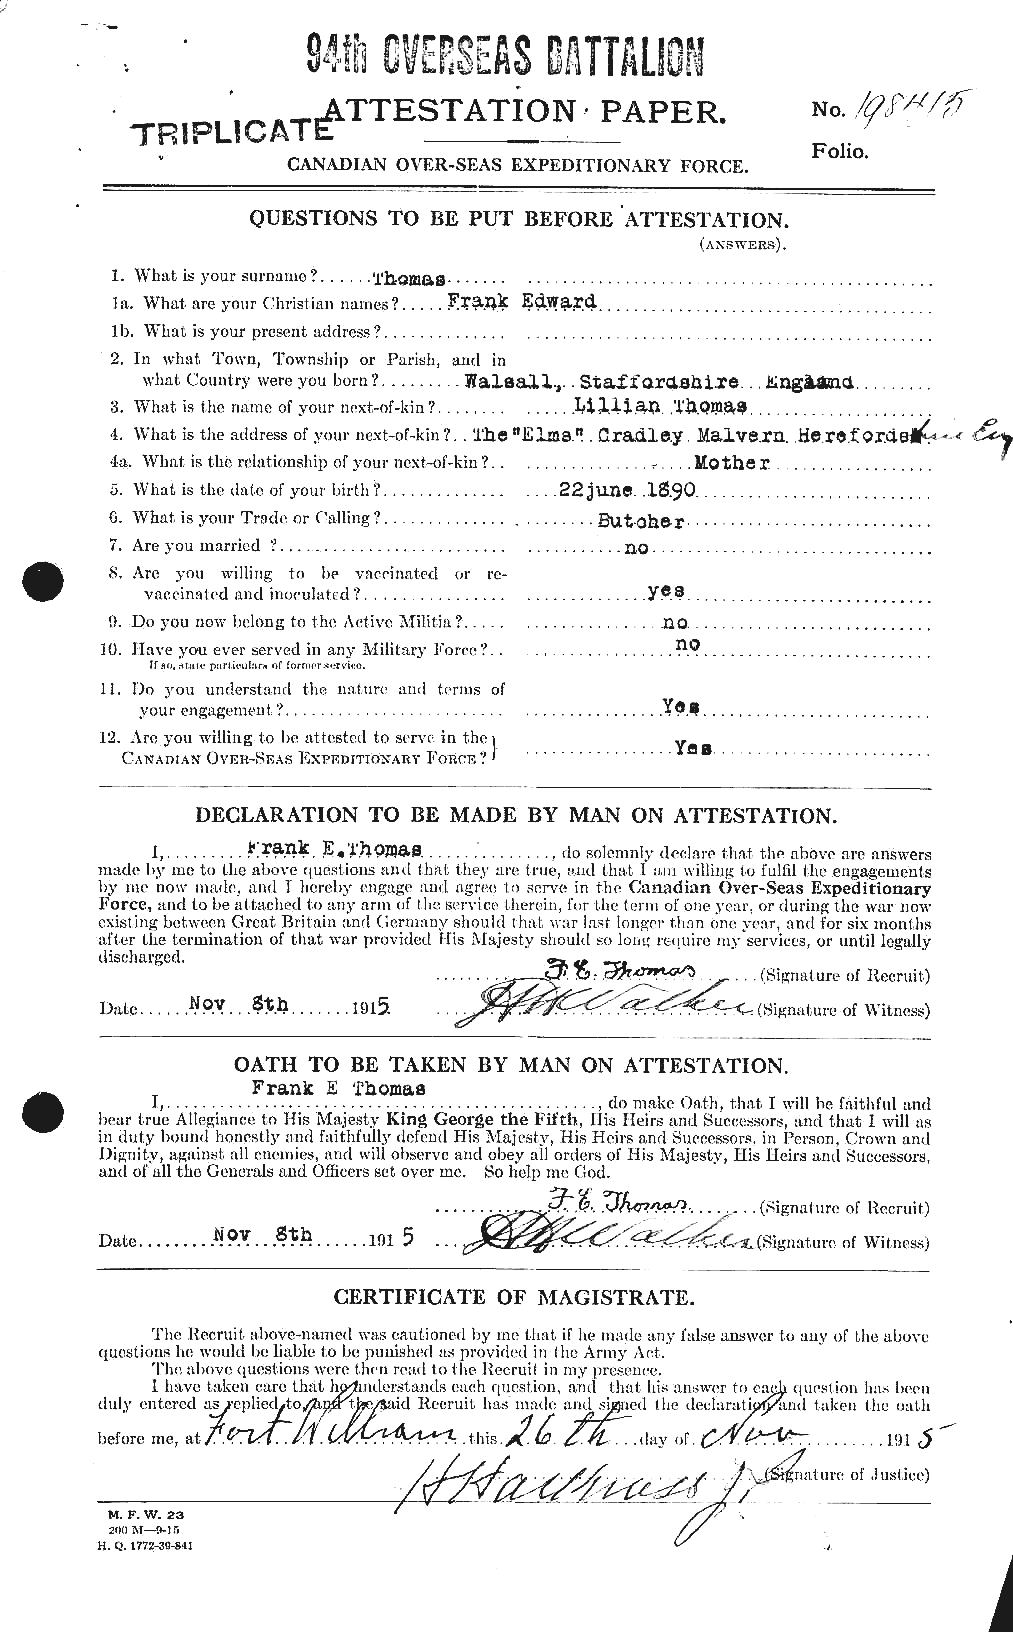 Personnel Records of the First World War - CEF 631593a